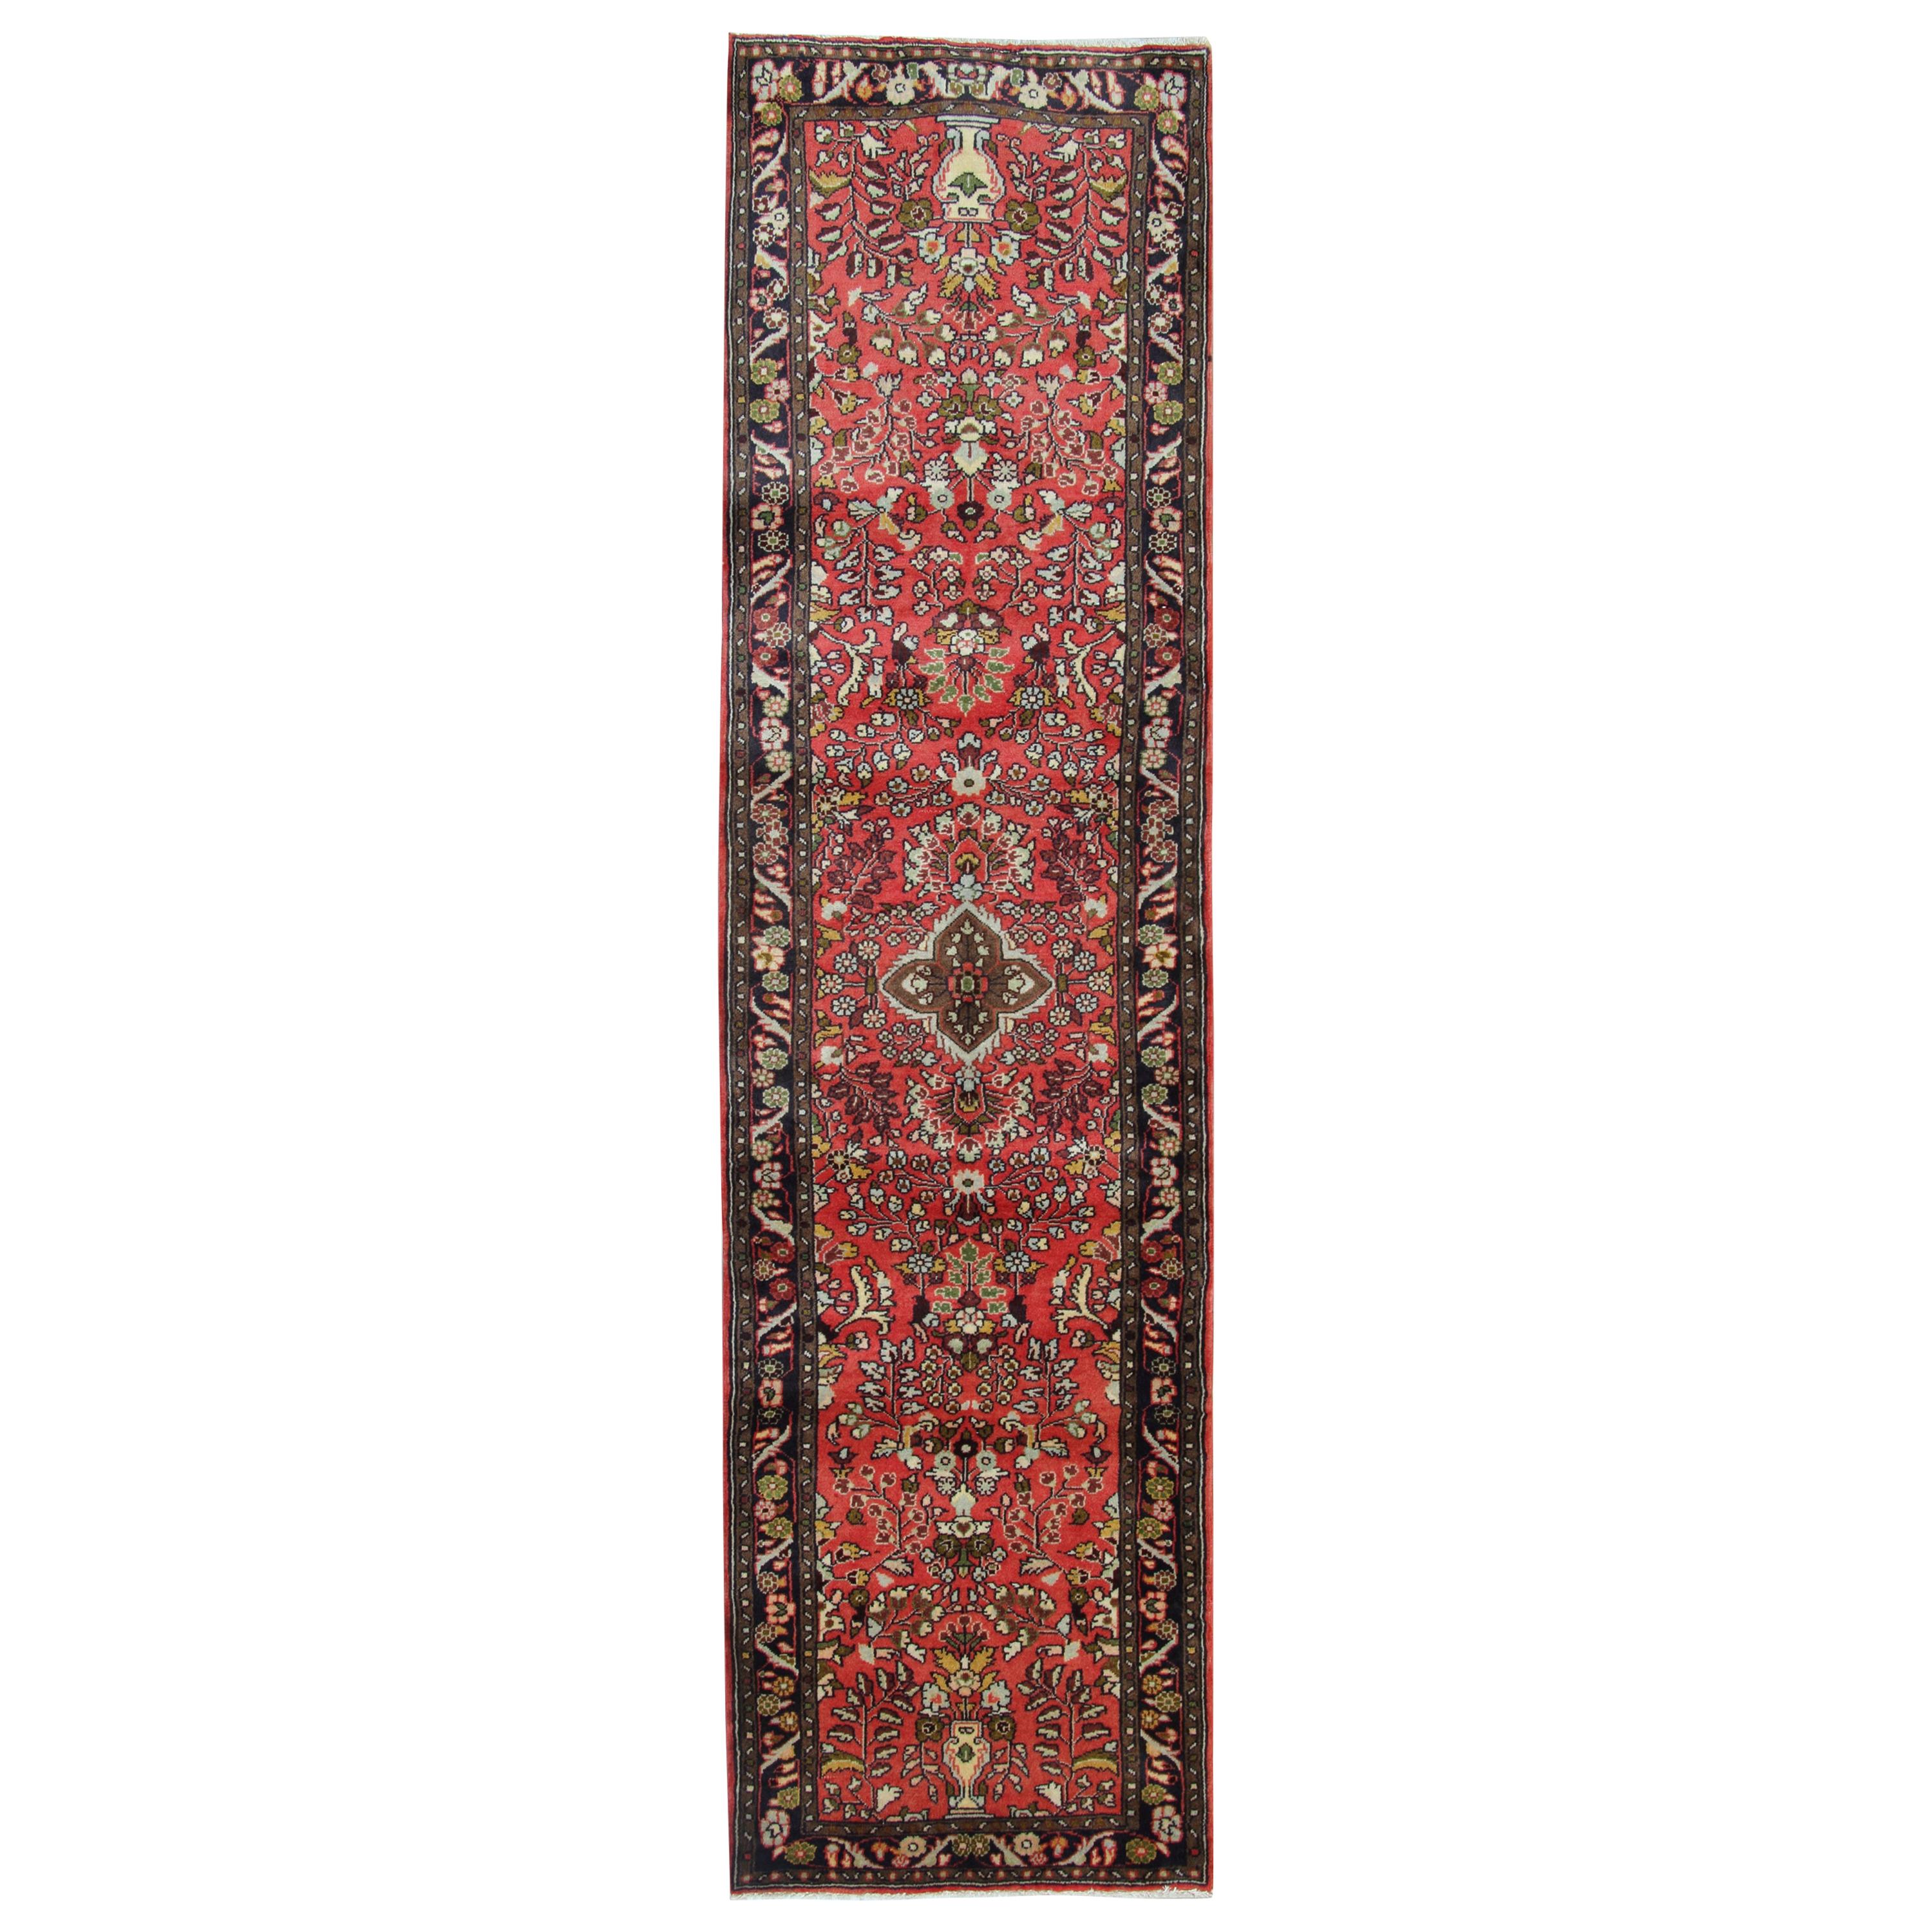 Handwoven Oriental Wool Runner Rug, Traditional Red Blue Carpet- 77x265cm For Sale